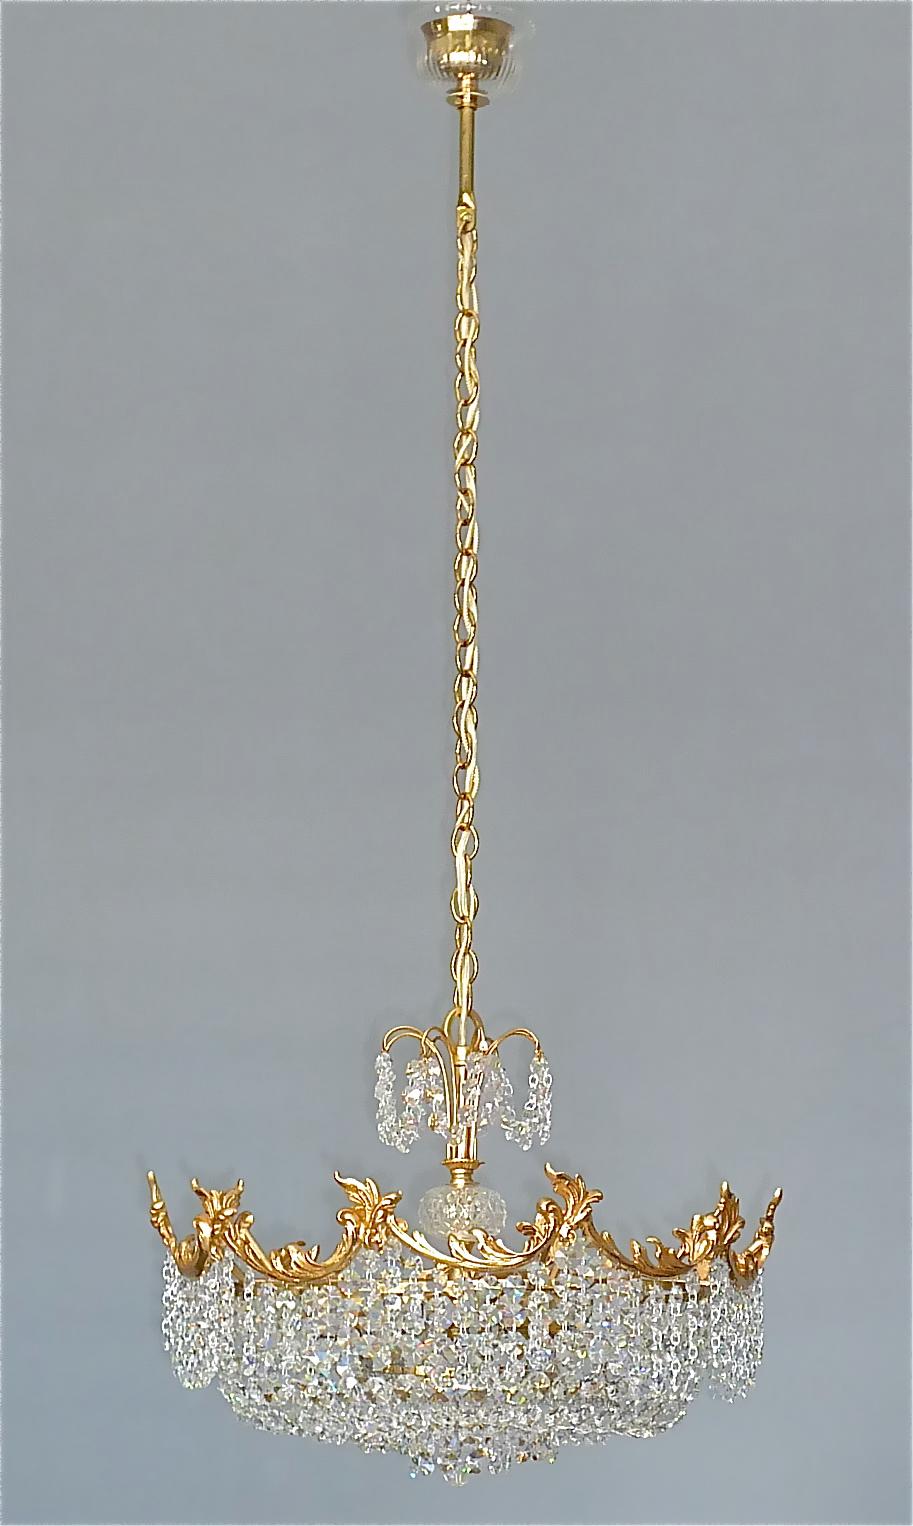 Fine classical Rococo style multi-tiered gilt brass and crystal glass chandelier made by Palwa, Germany circa 1960. The Hollywood Regency chain-hanging length-adjustable chandelier has a wonderful floral rococo baroque style outer rim and lots of